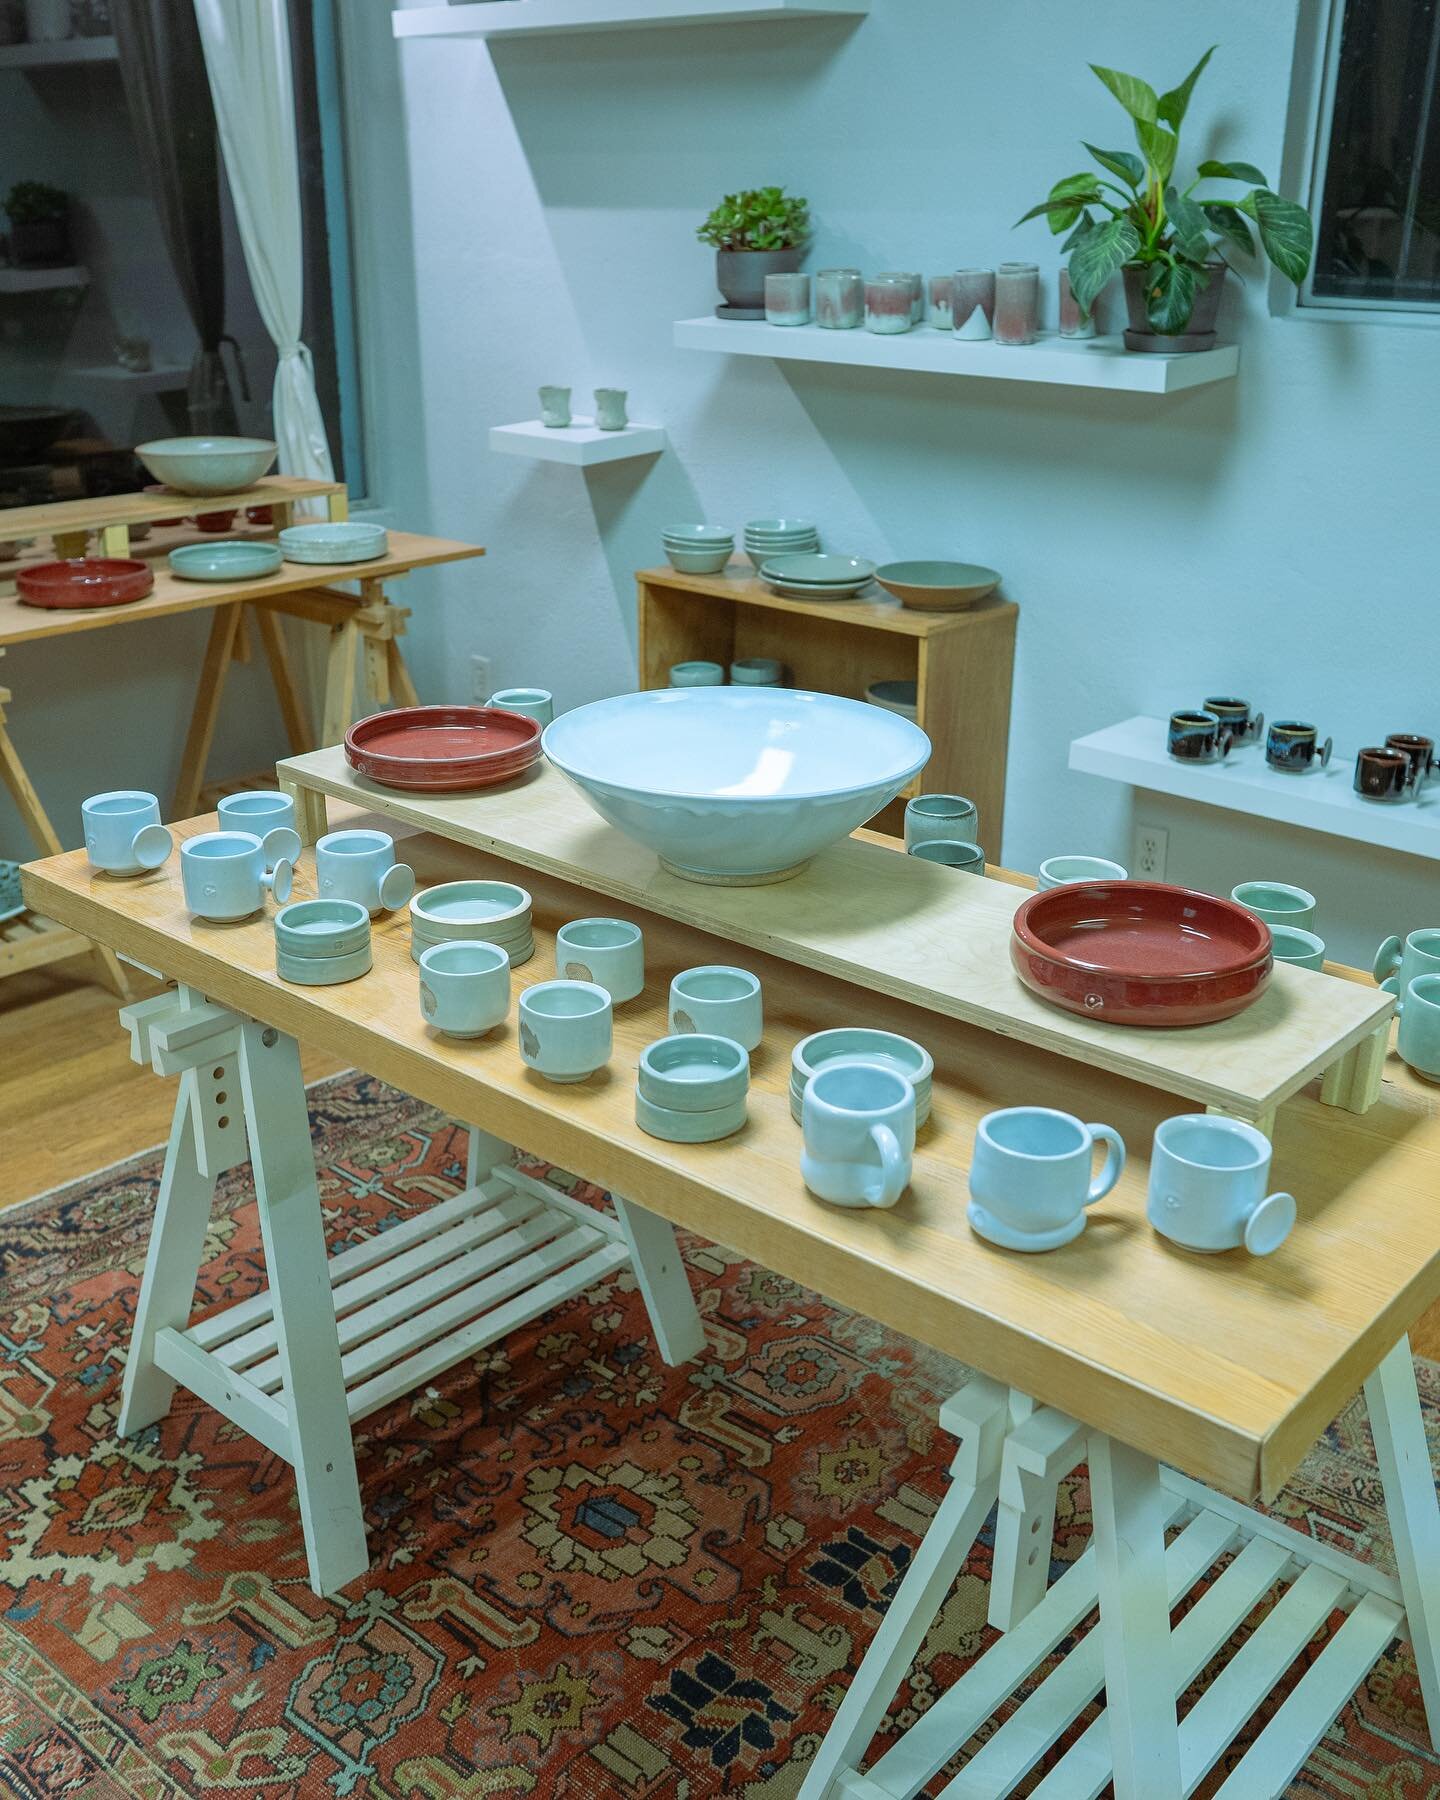 Holiday sale Saturday the 16th, come out and support @claystreetstudiospdx. This will be our final Event of the year so don&rsquo;t miss out on this great opportunity to pick up some holiday gifts and support a small business! Lots of ceramics, food,